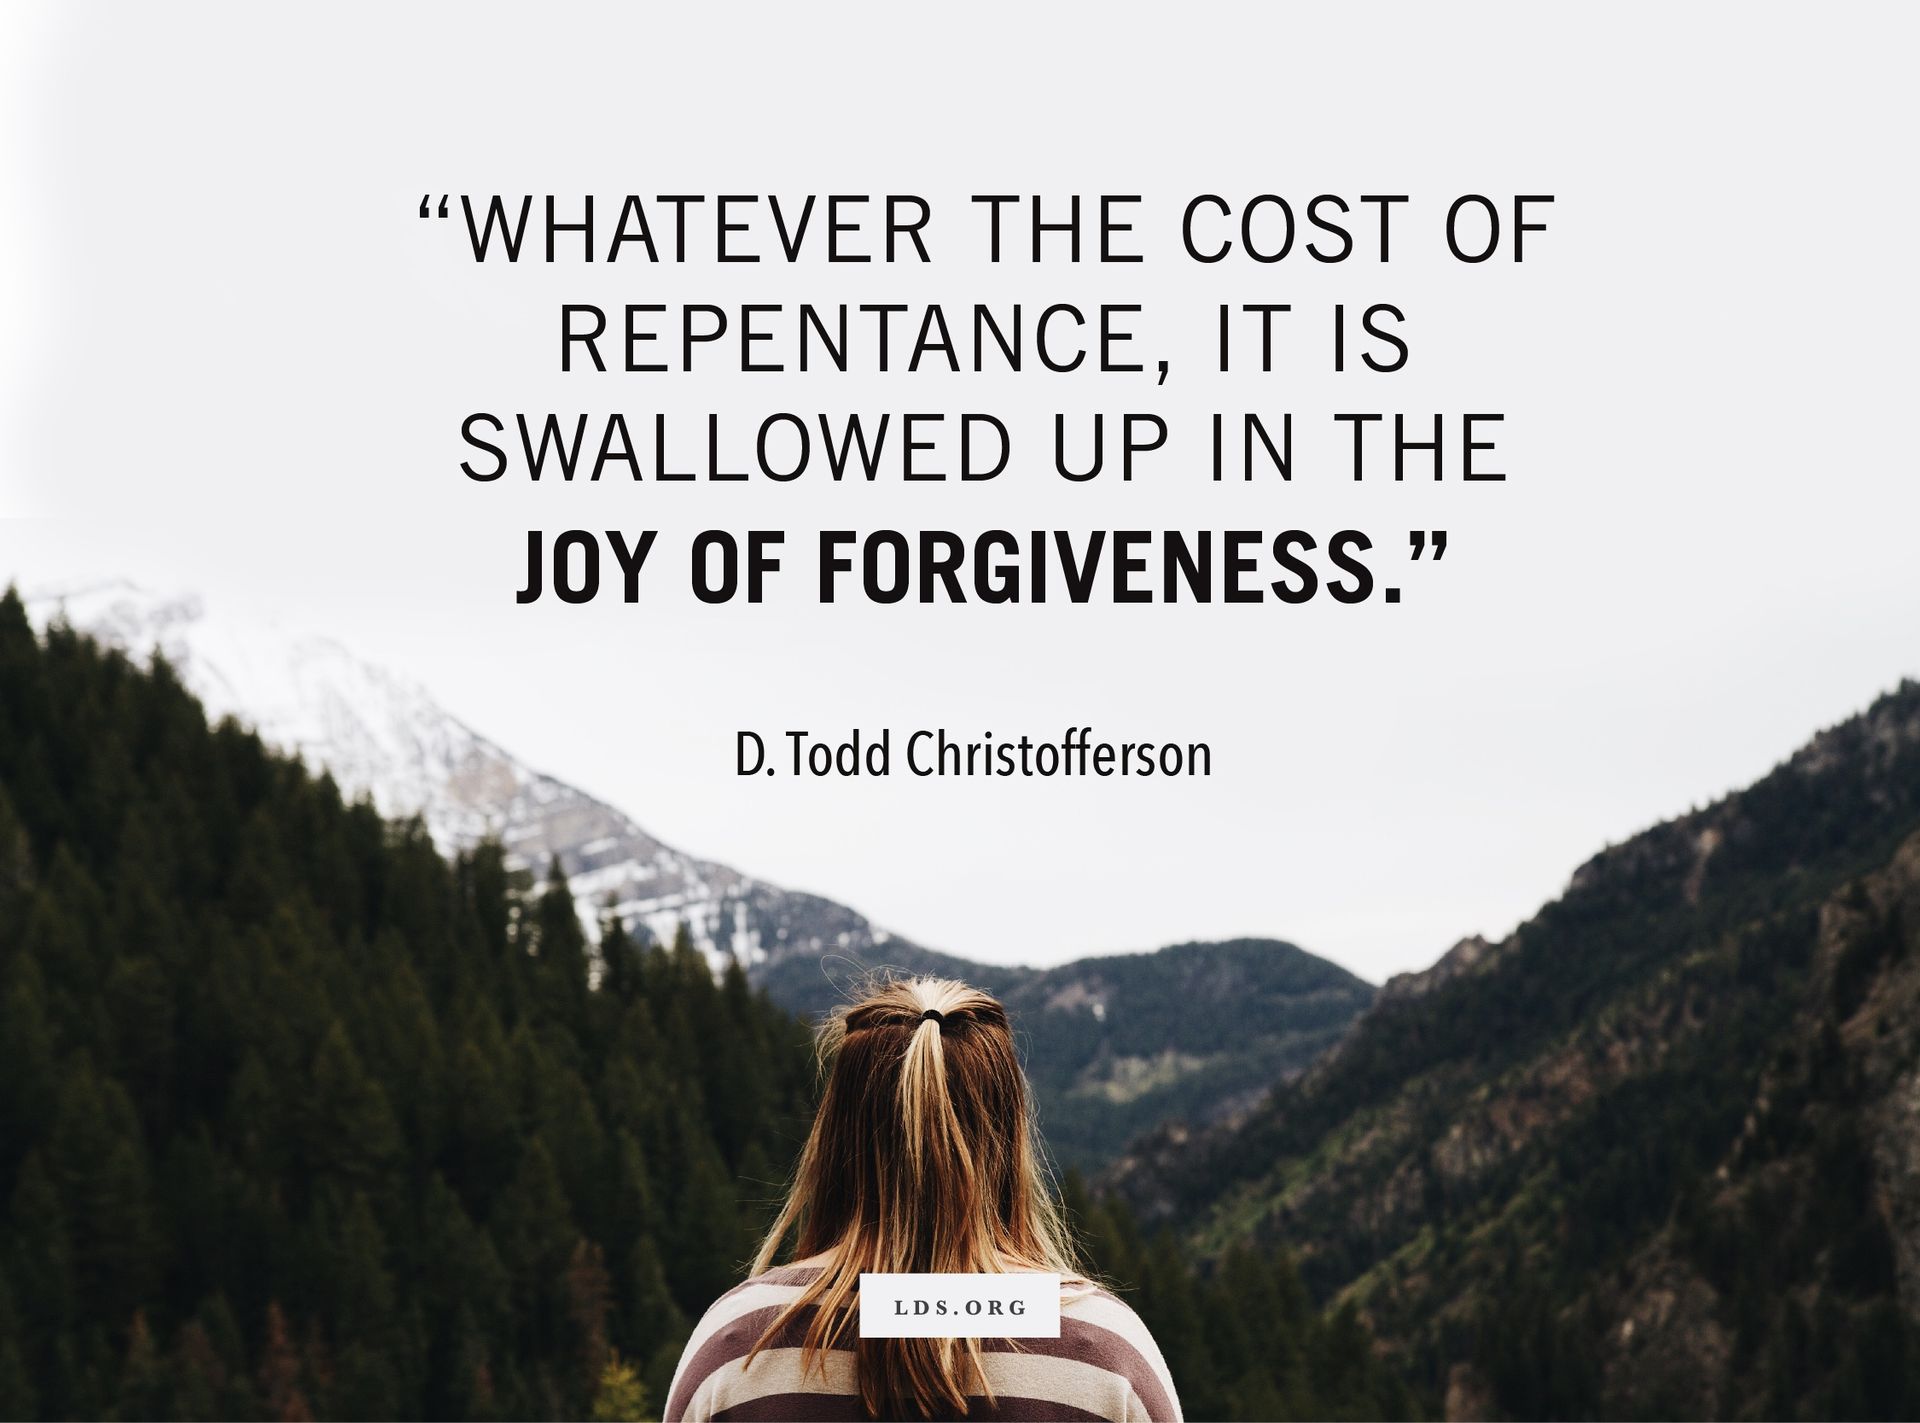 “Whatever the cost of repentance, it is swallowed up in the joy of forgiveness.” —Elder D. Todd Christofferson, “The Divine Gift of Repentance” © undefined ipCode 1.